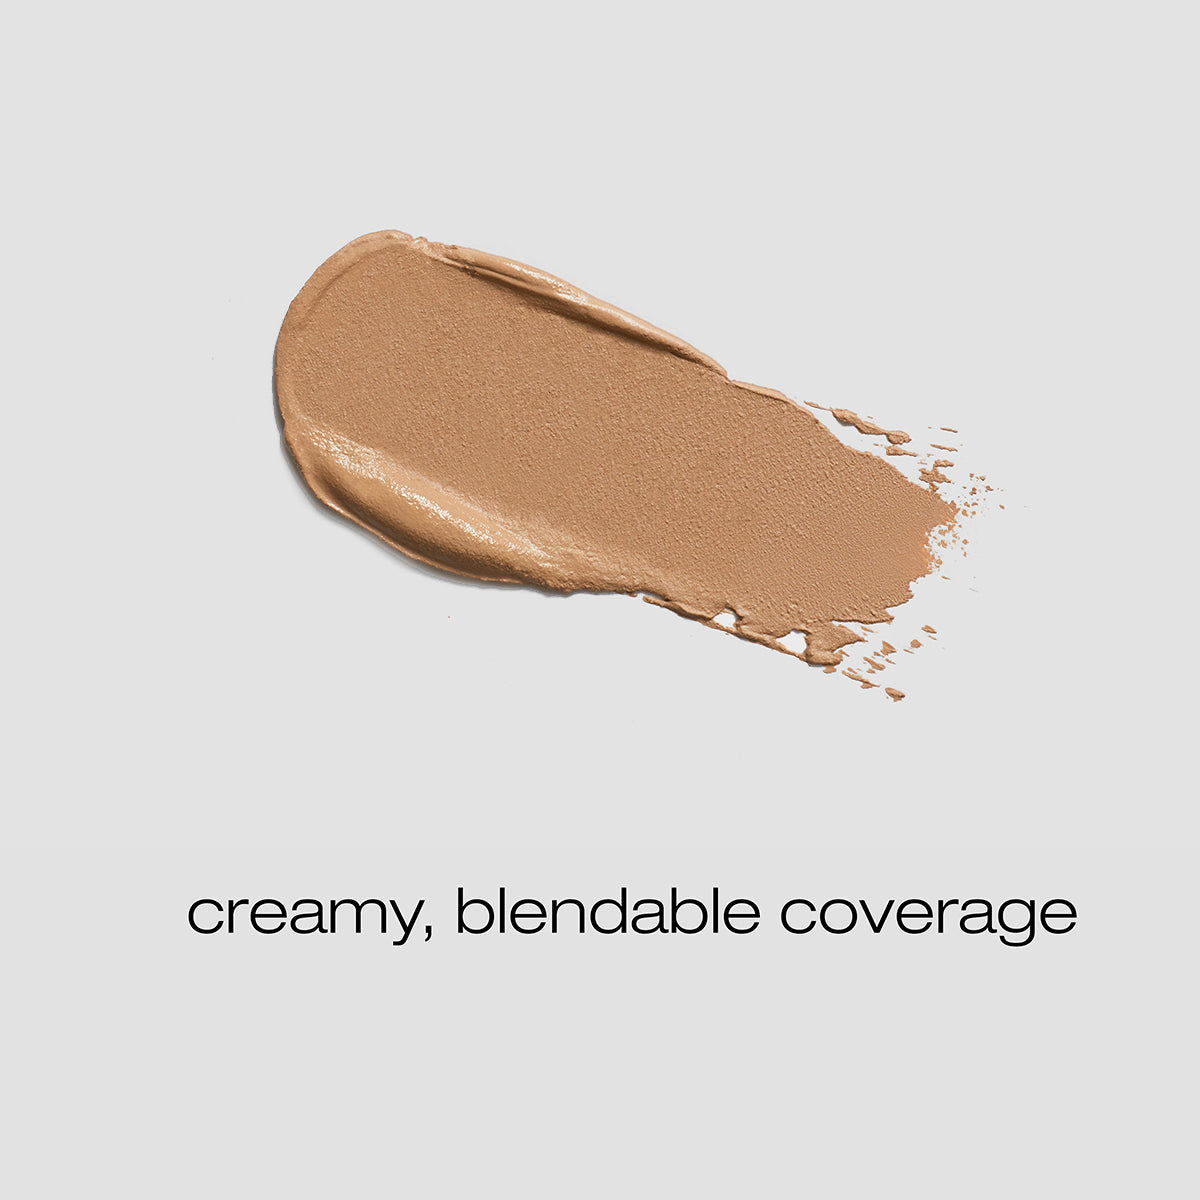 Spread of the latte concealer with description of creamy, blendable coverage